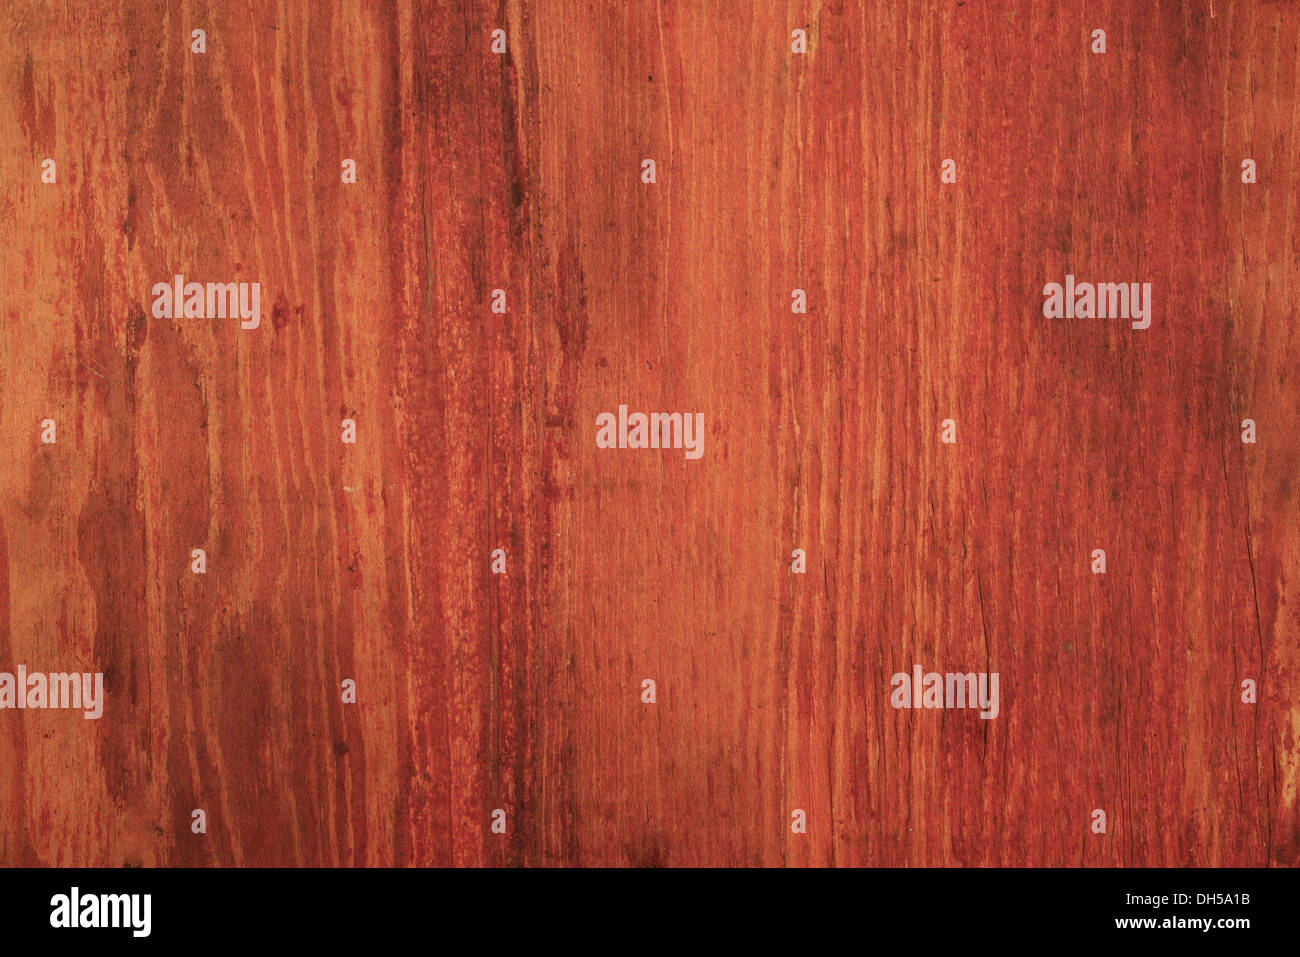 Old retro red wooden surface pattern texture Stock Photo